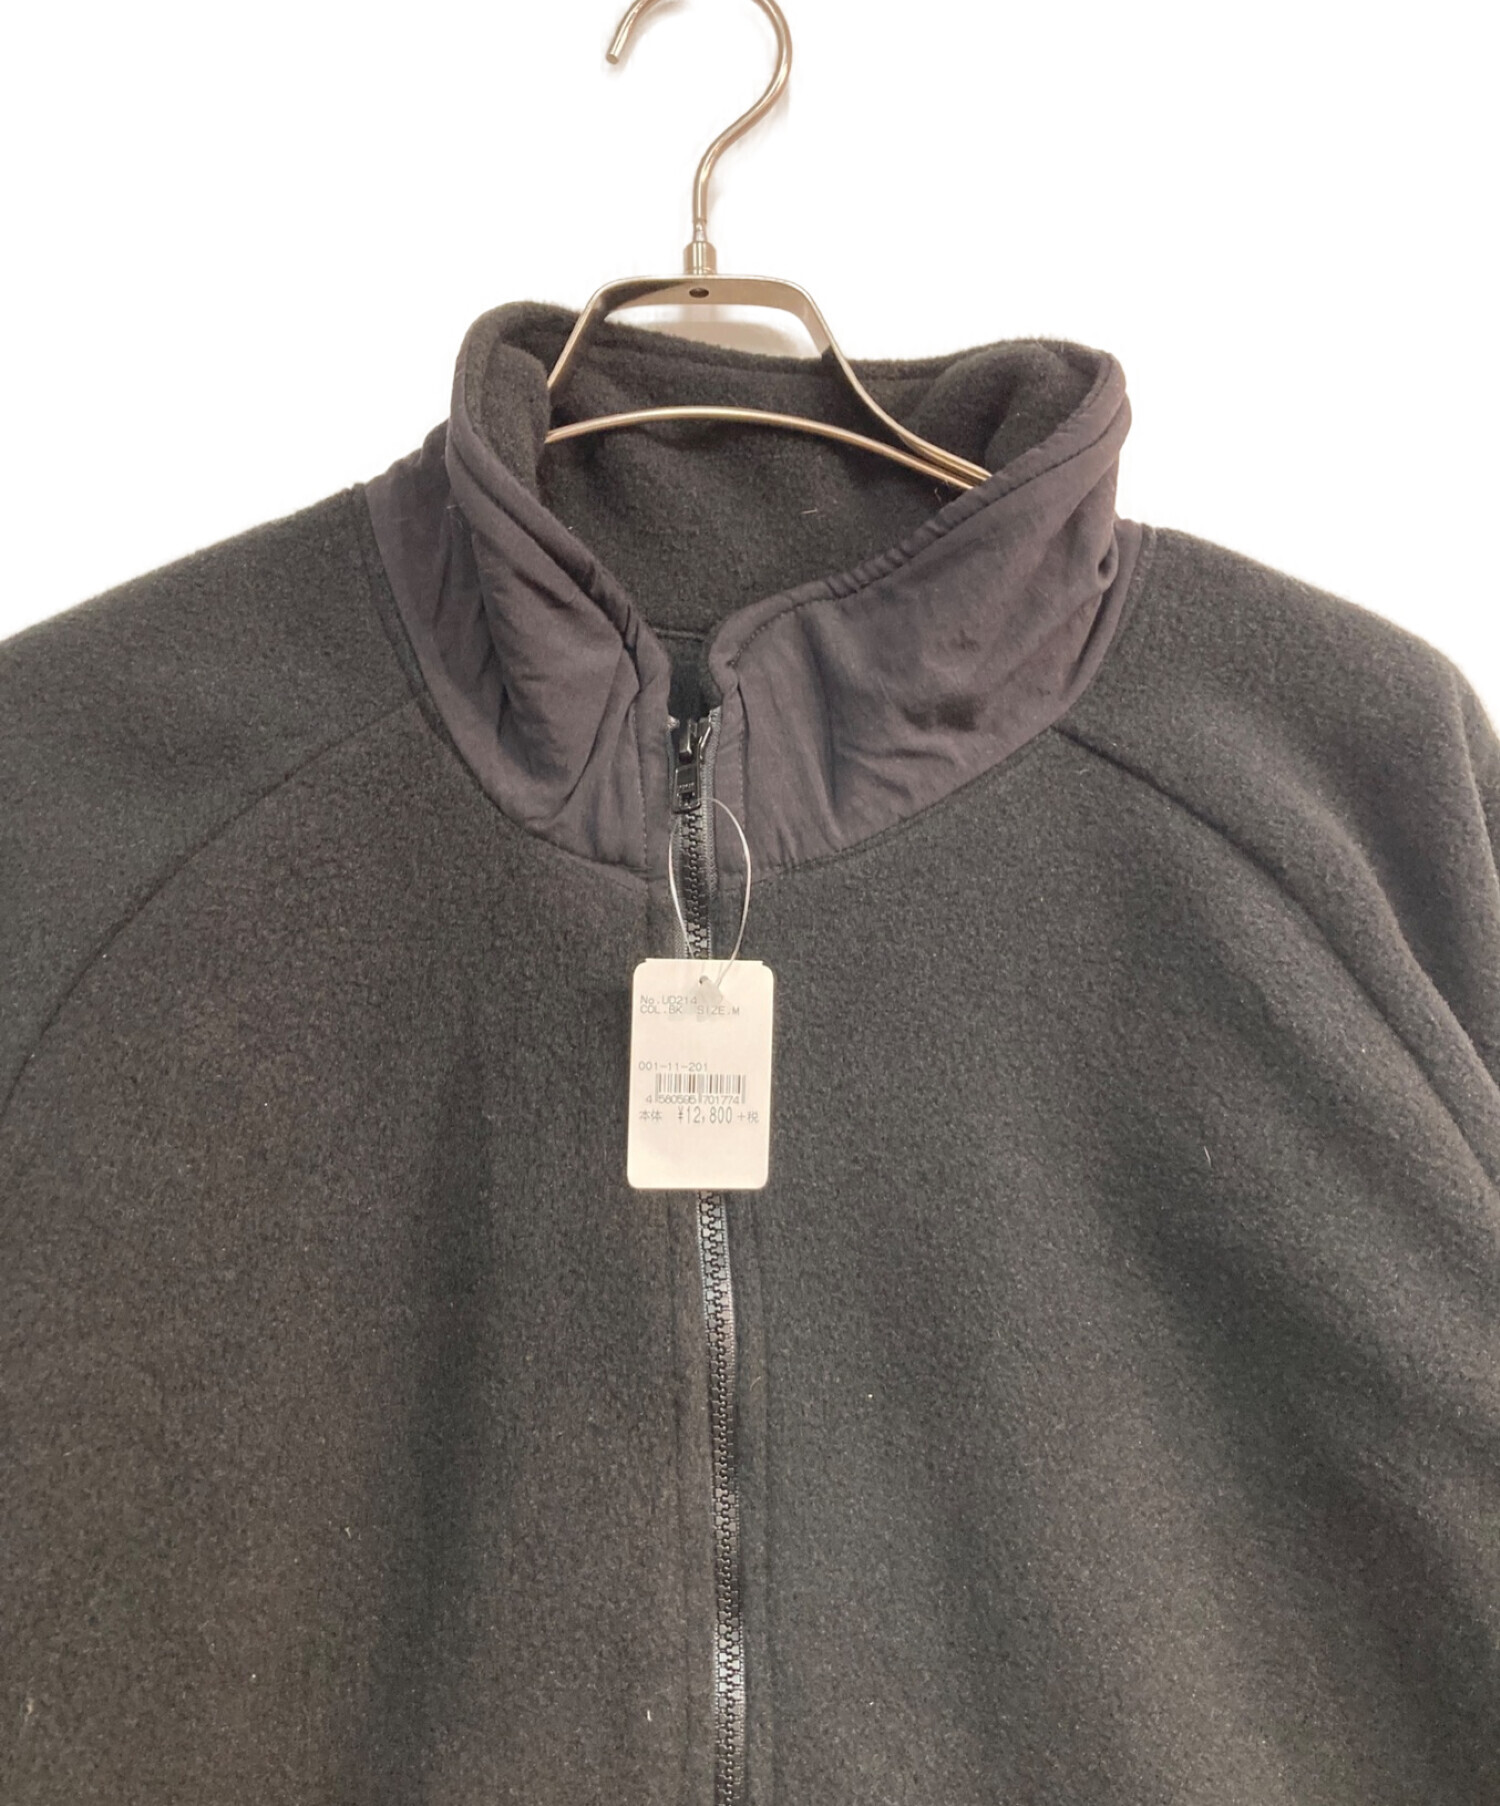 U.S MILITARY (ユーエス ミリタリー) GENⅢ LEVEL3 FLEECE JACKET MADE BY UNITED JOIN  FORCES　UD214 ブラック サイズ:M 未使用品